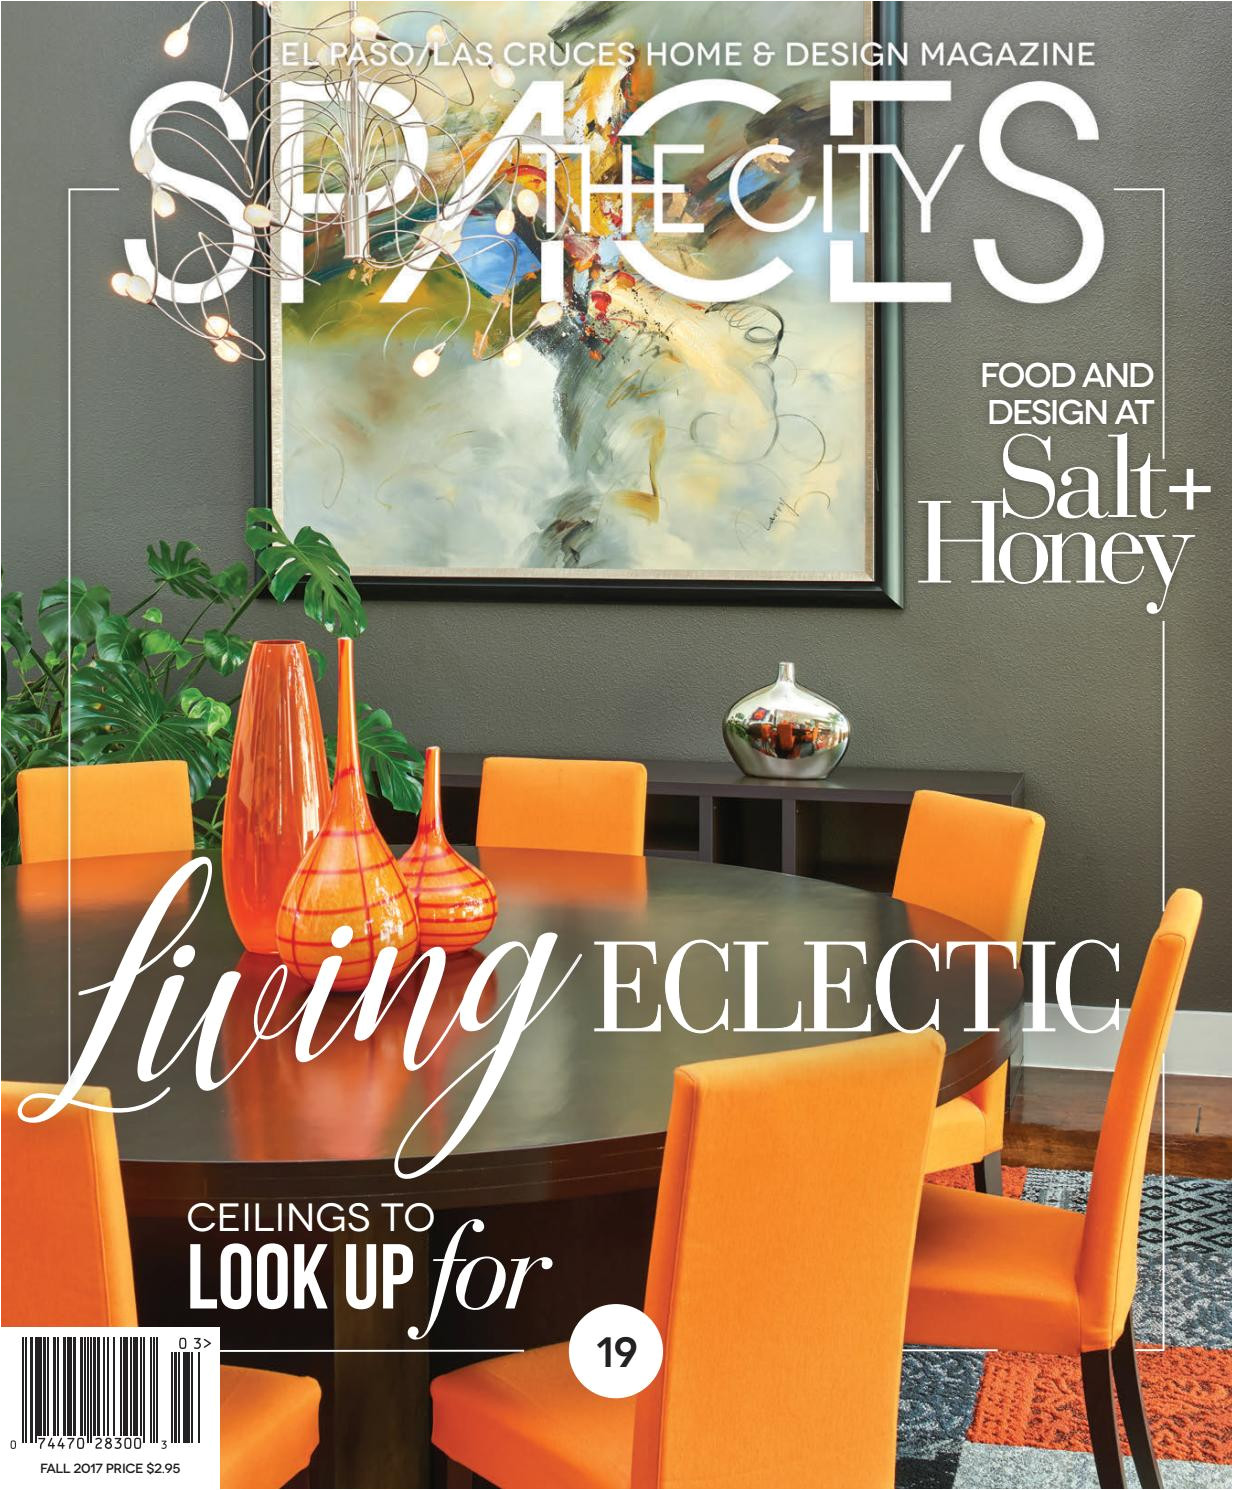 thecity spaces fall 2017 by thecity magazine el paso las cruces issuu